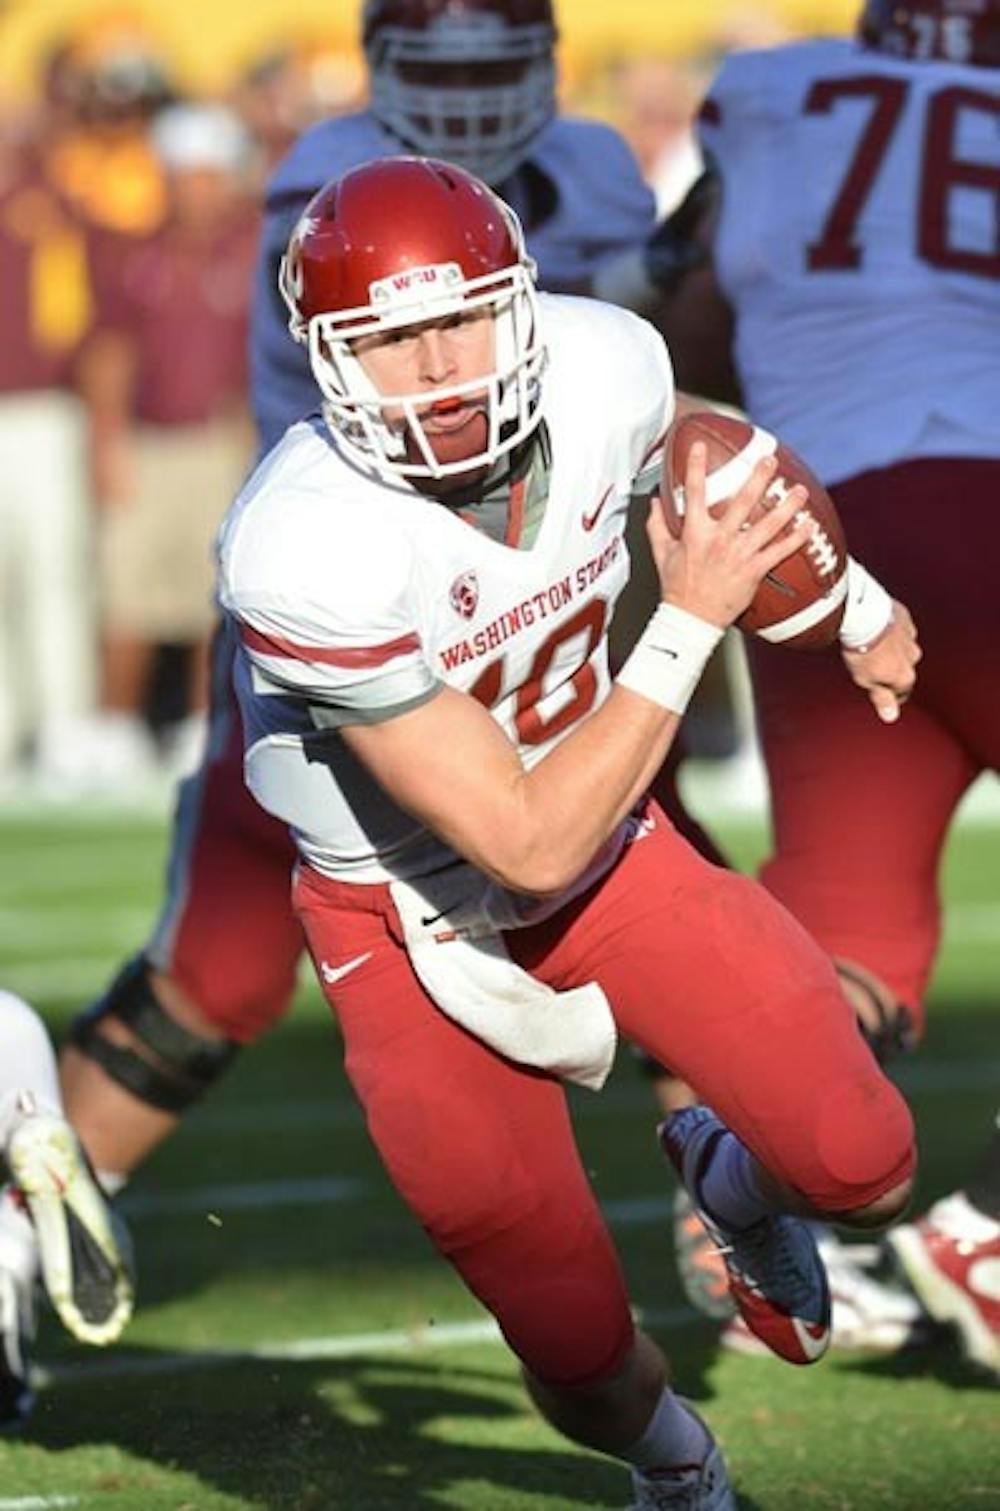 NOWHERE TO RUN: Washington State sophomore quarterback Jeff Tuel scrambles out of the pocket against ASU on Saturday. The Cougars failed to score any points for the first time this season. (Photo by Aaron Lavinsky)